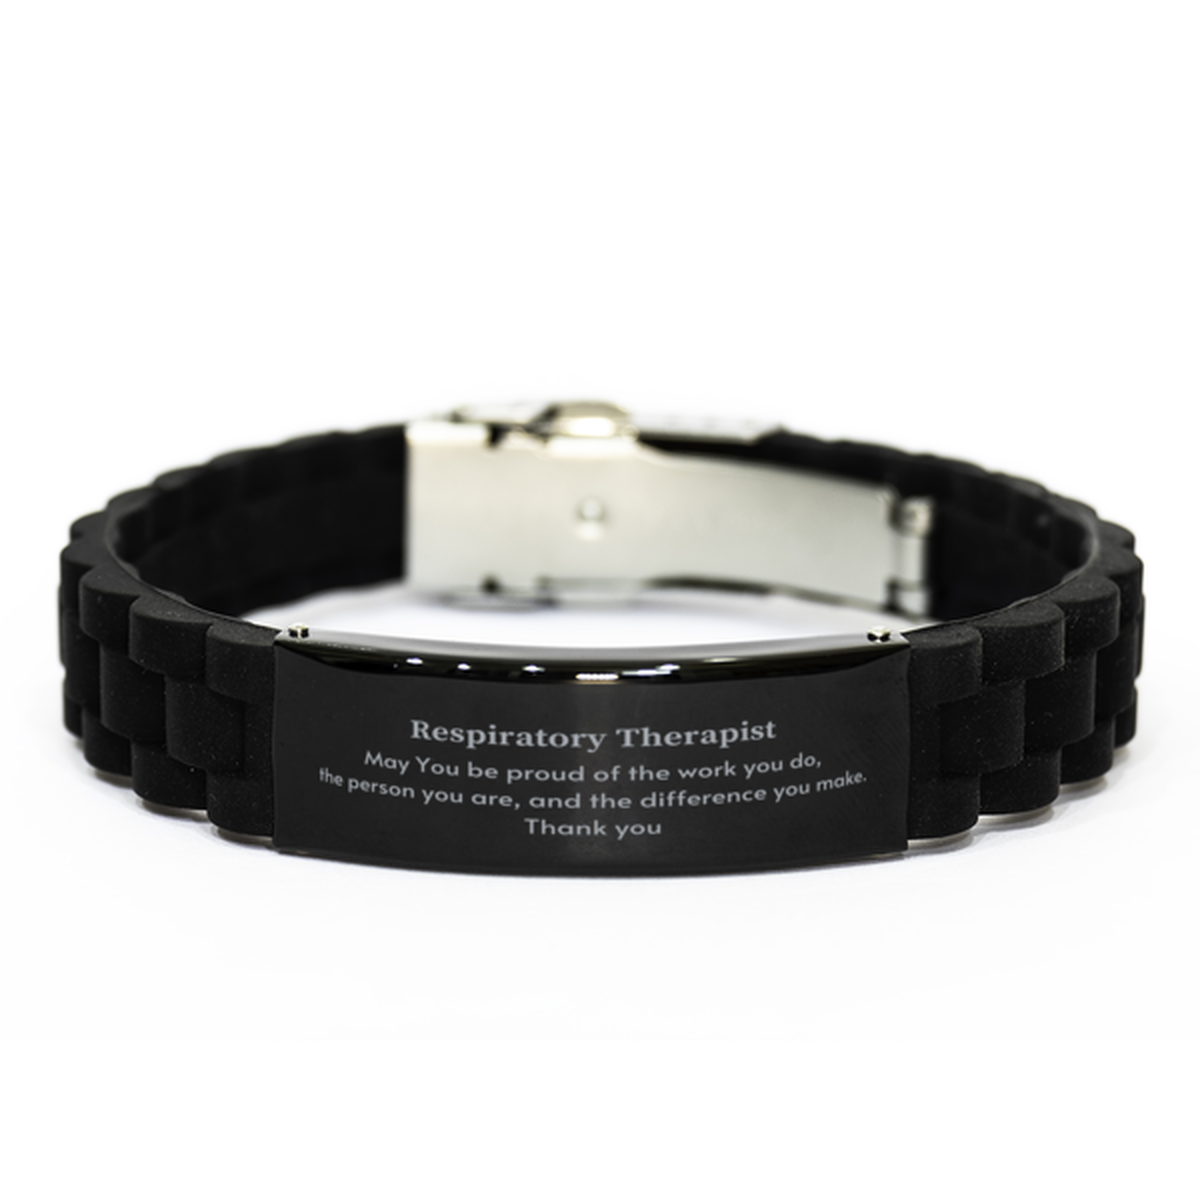 Heartwarming Black Glidelock Clasp Bracelet Retirement Coworkers Gifts for Respiratory Therapist, Respiratory Therapist May You be proud of the work you do, the person you are Gifts for Boss Men Women Friends